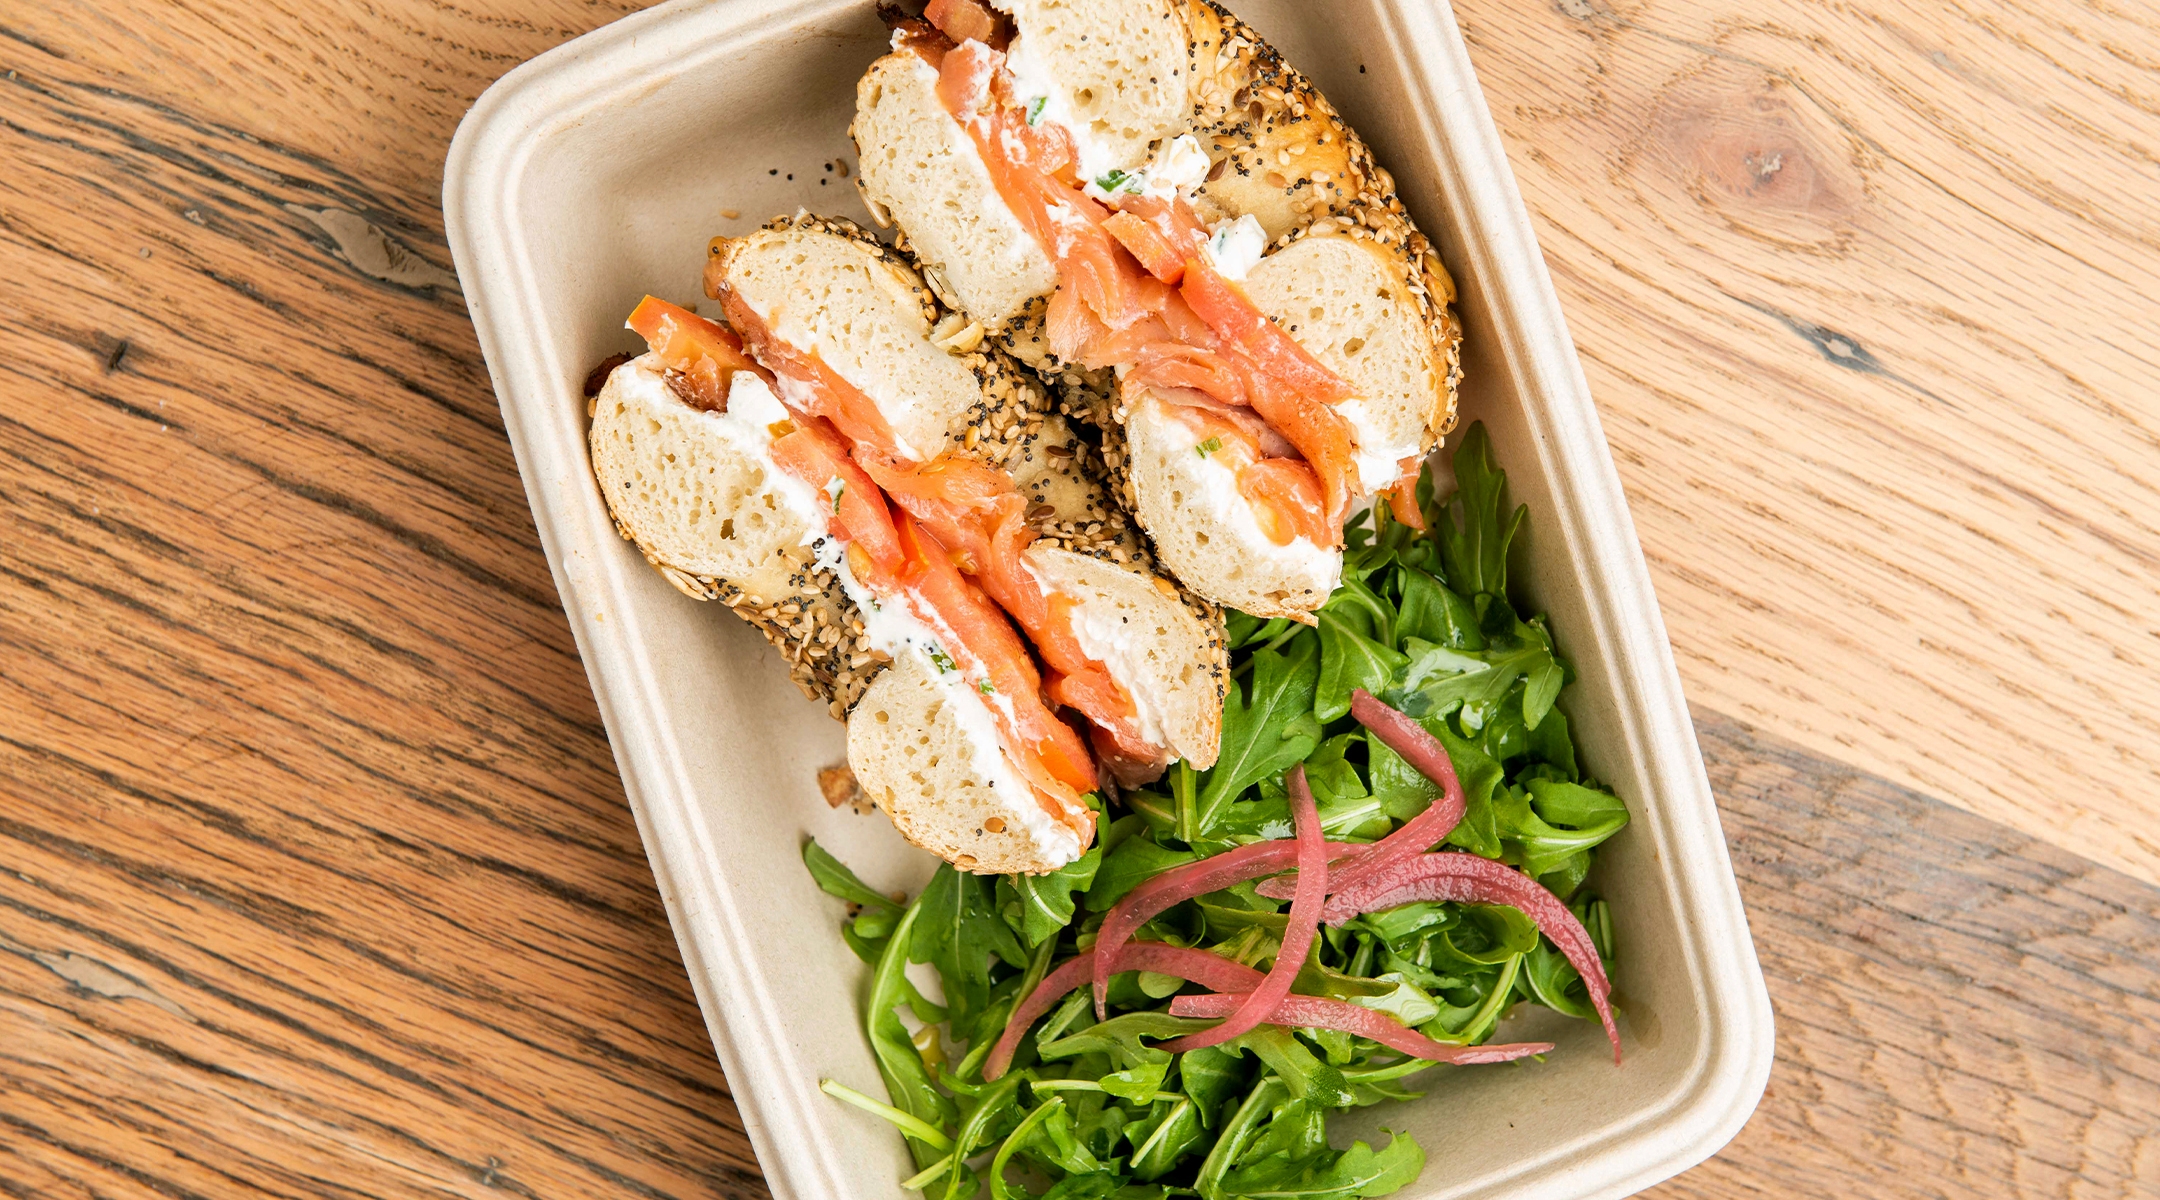 Everything at Modern Bread & Bagel, a restaurant and bakery on the Upper West Side, is kosher and gluten-free. (Courtesy of Modern Bread & Bagel)